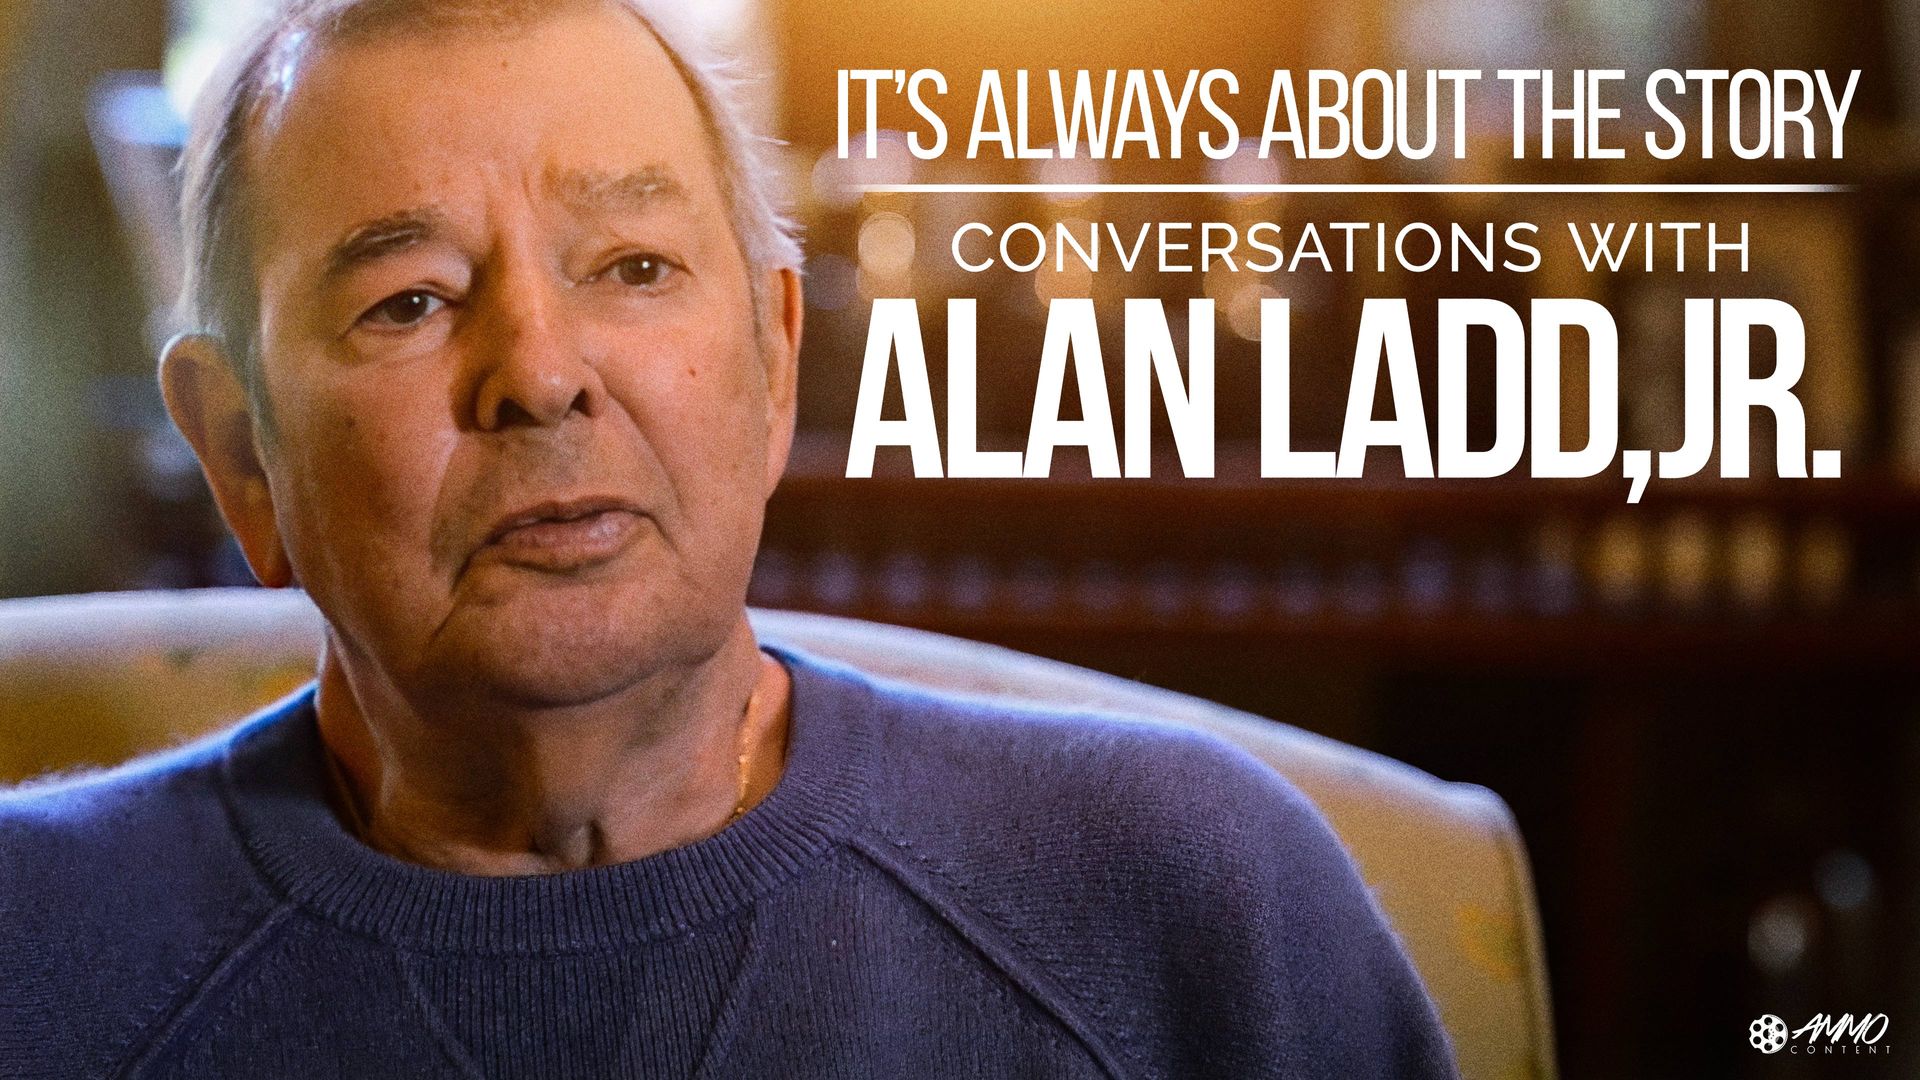 It's Always About the Story: Conversations with Alan Ladd, Jr. Backdrop